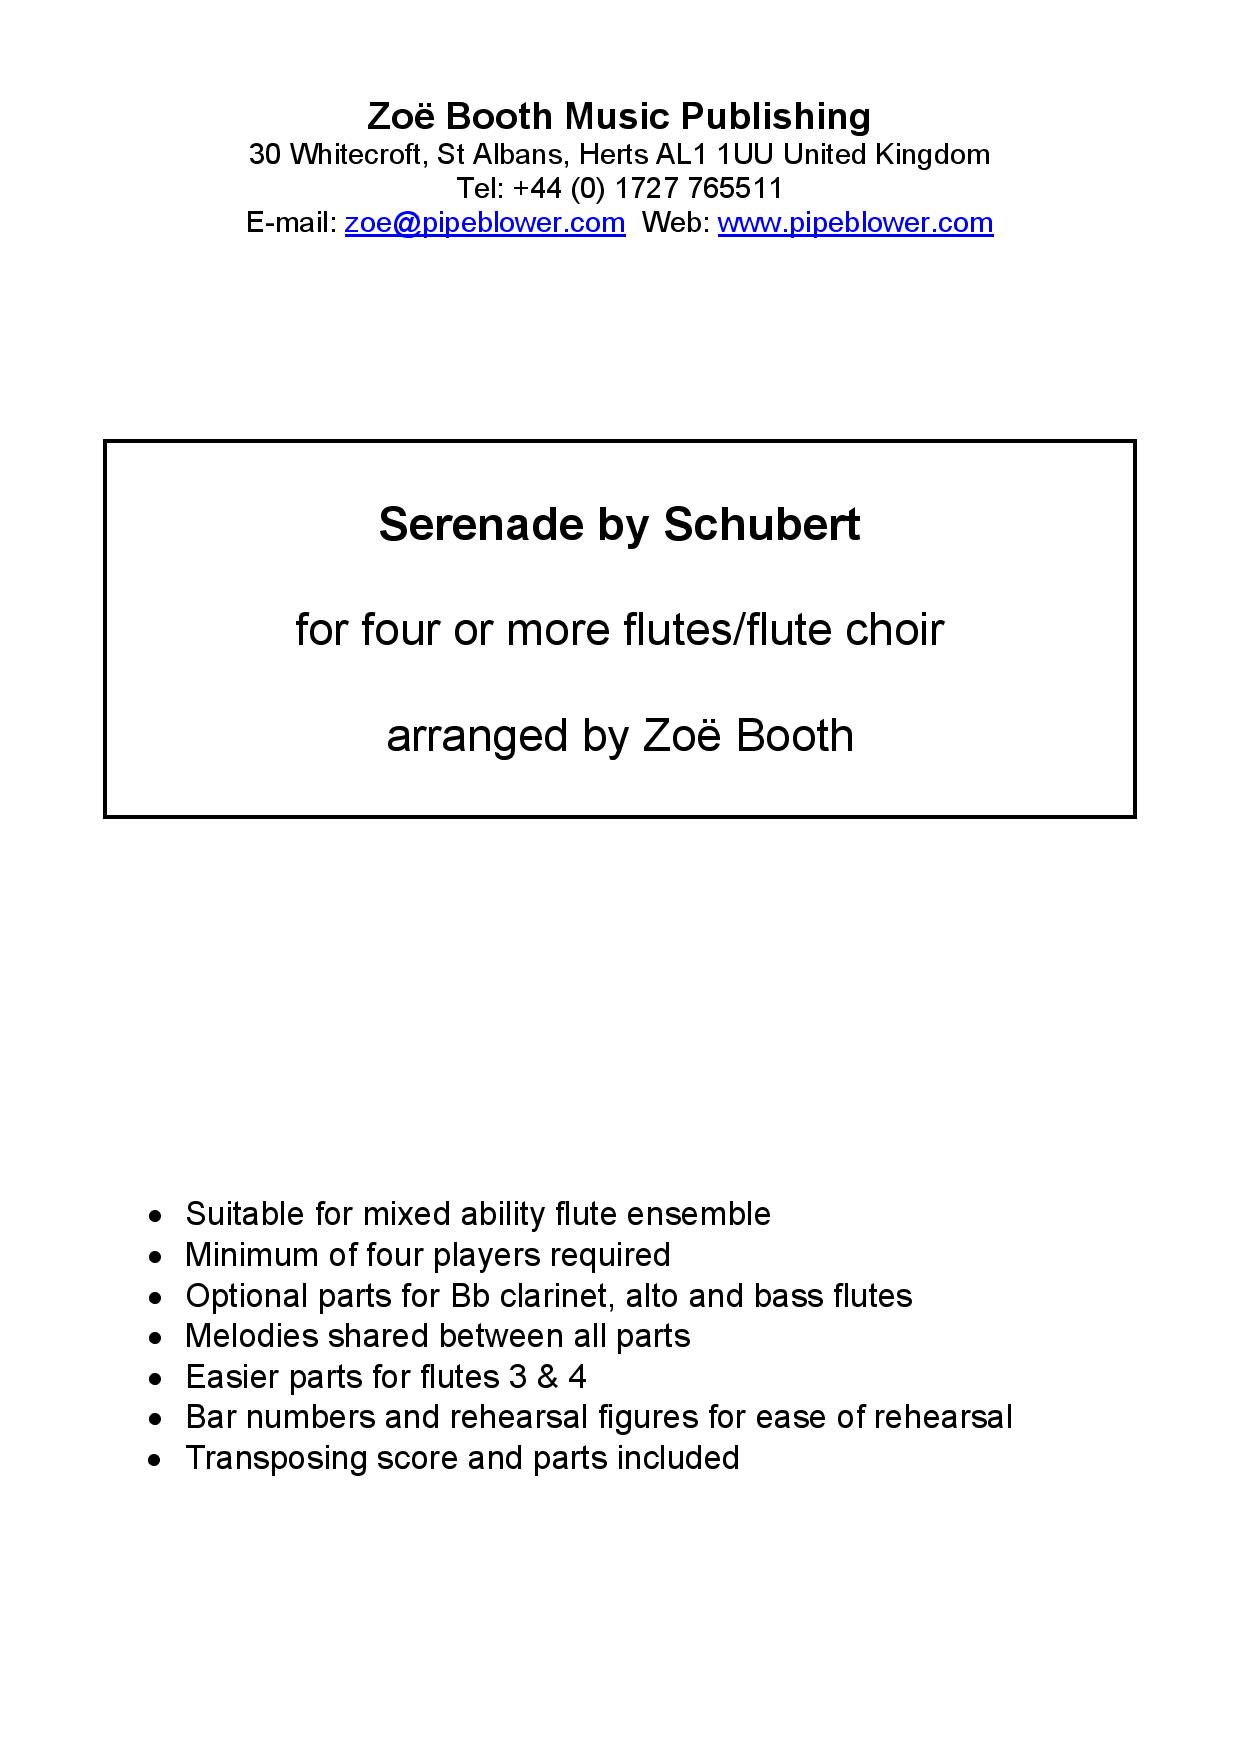 Serenade by Schubert  arranged by Zoë Booth for four or more flutes/flute choir